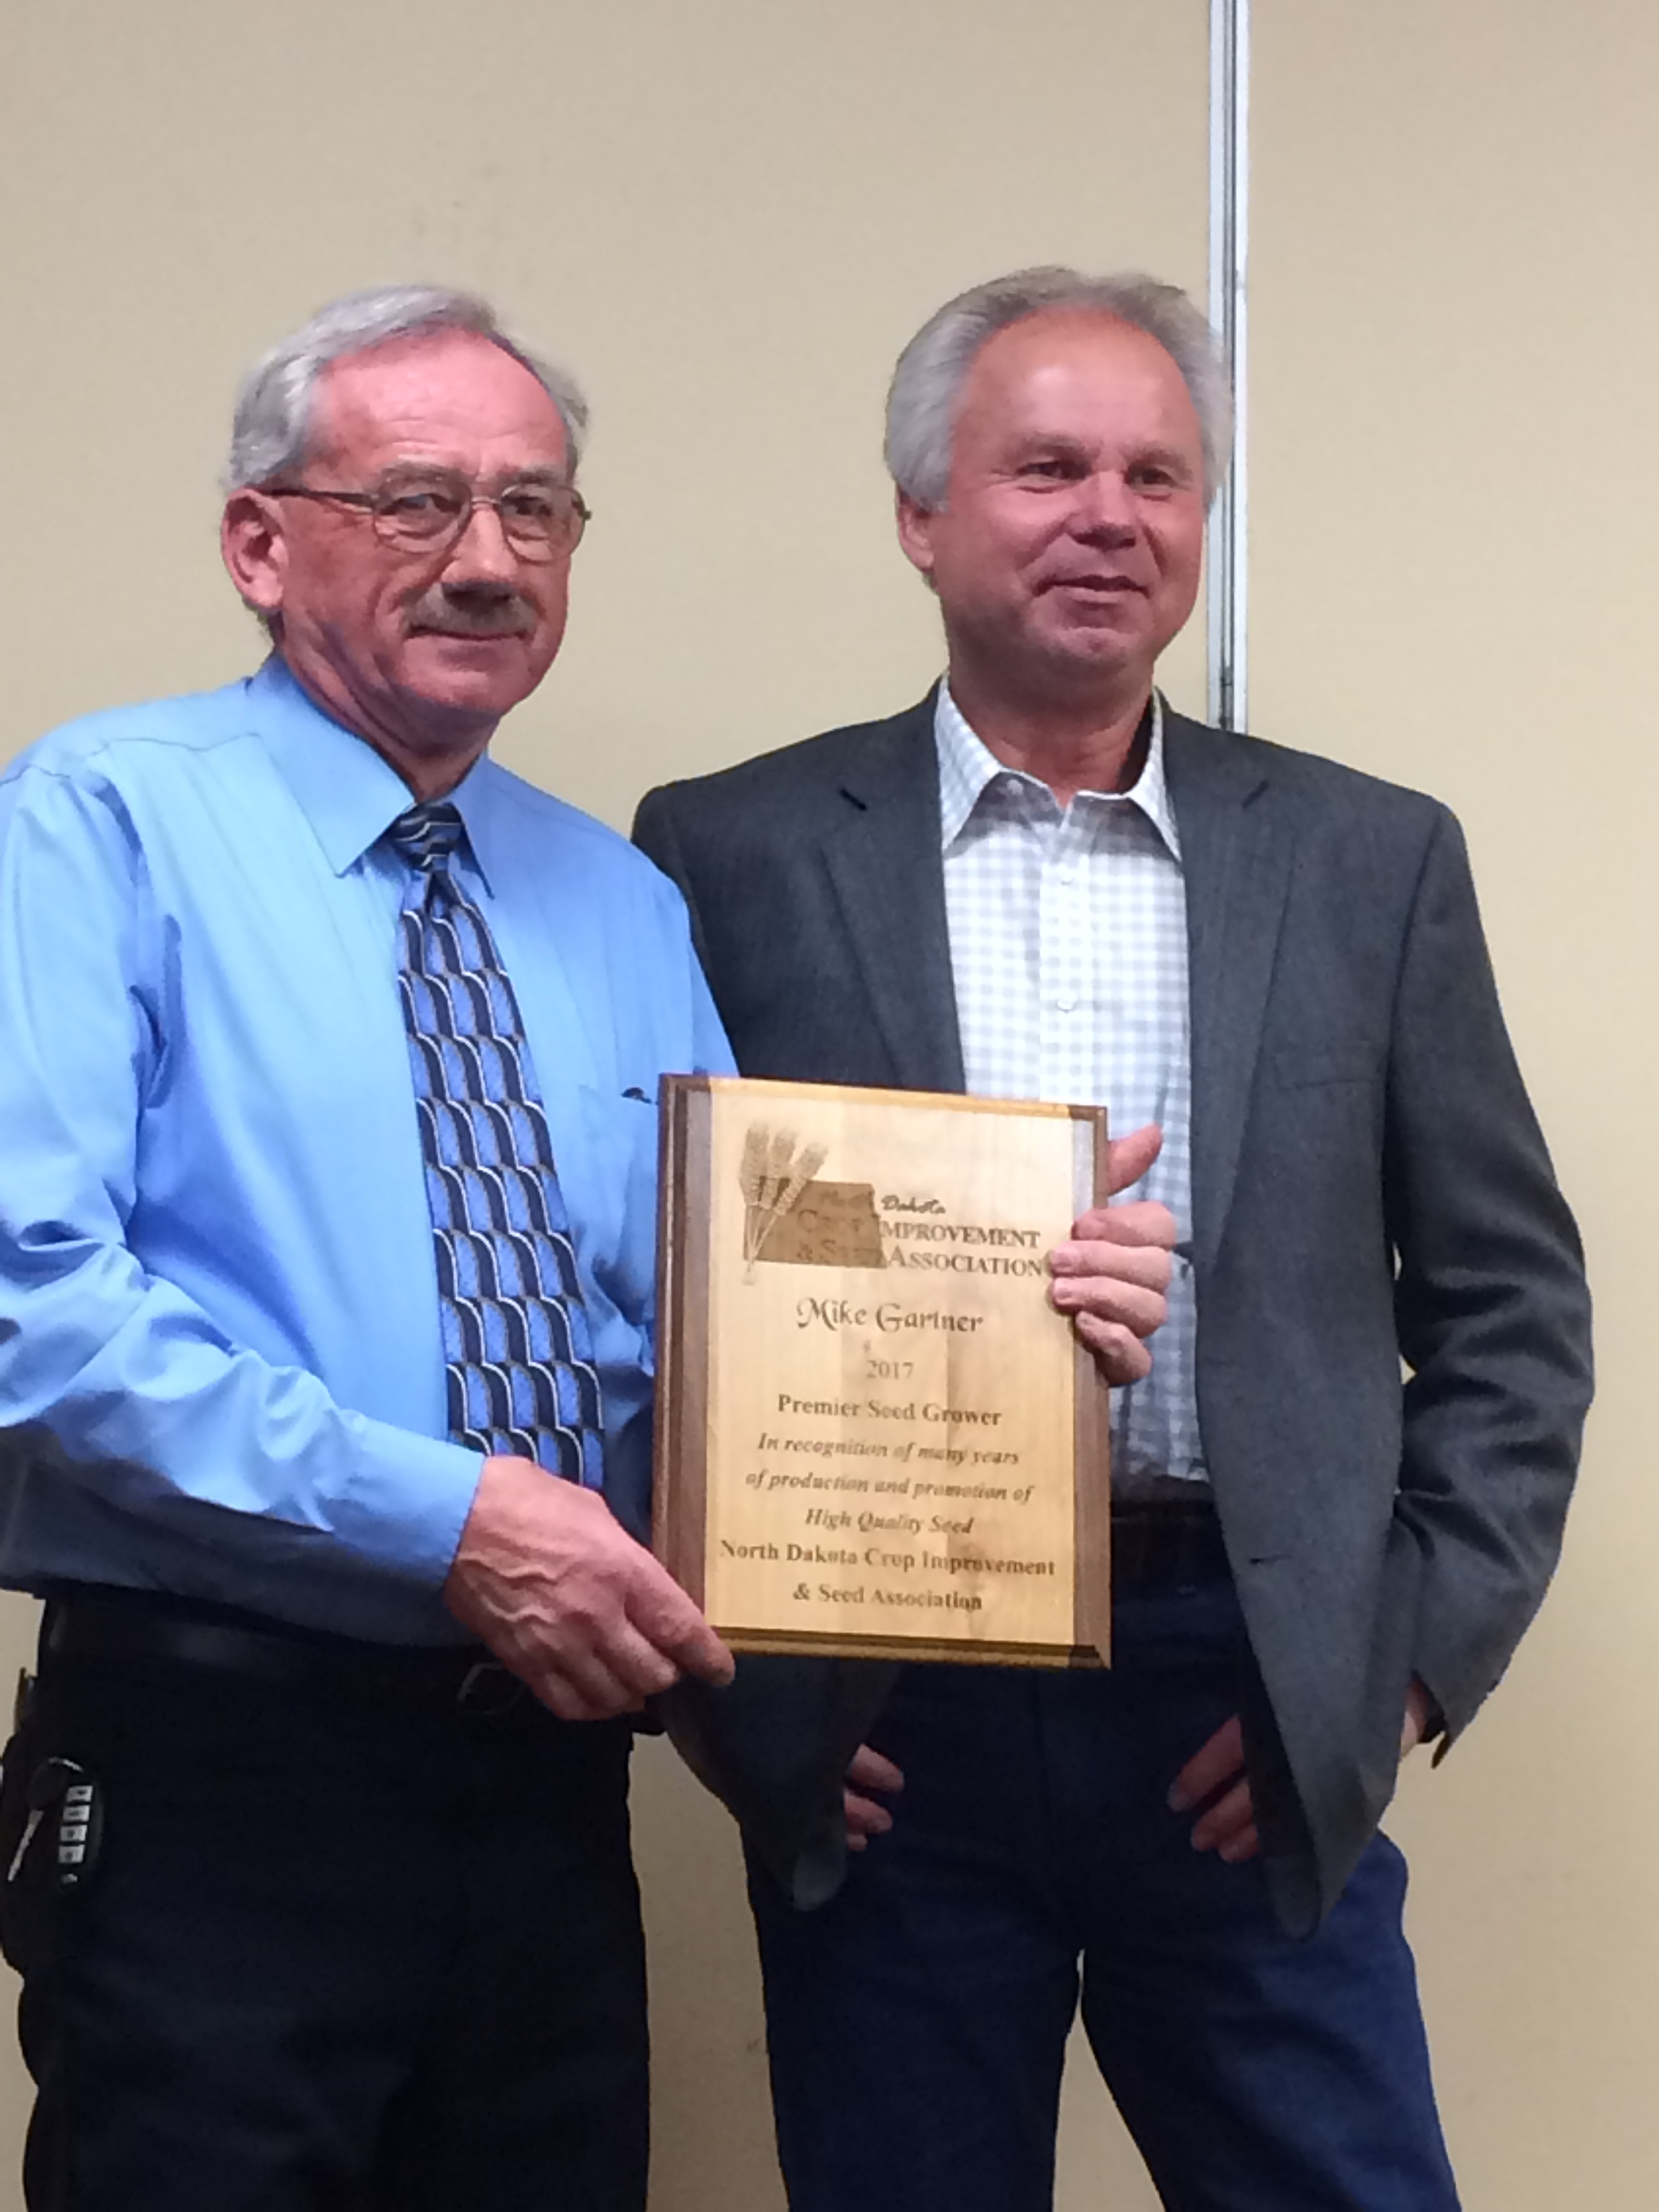 Mike Gartner (left), a procuder from Mandan, receives the Premier Seed Grower Award from Del Gates, president of the North Dakota Crop Improvement and Seed Association. (NDSU photo)